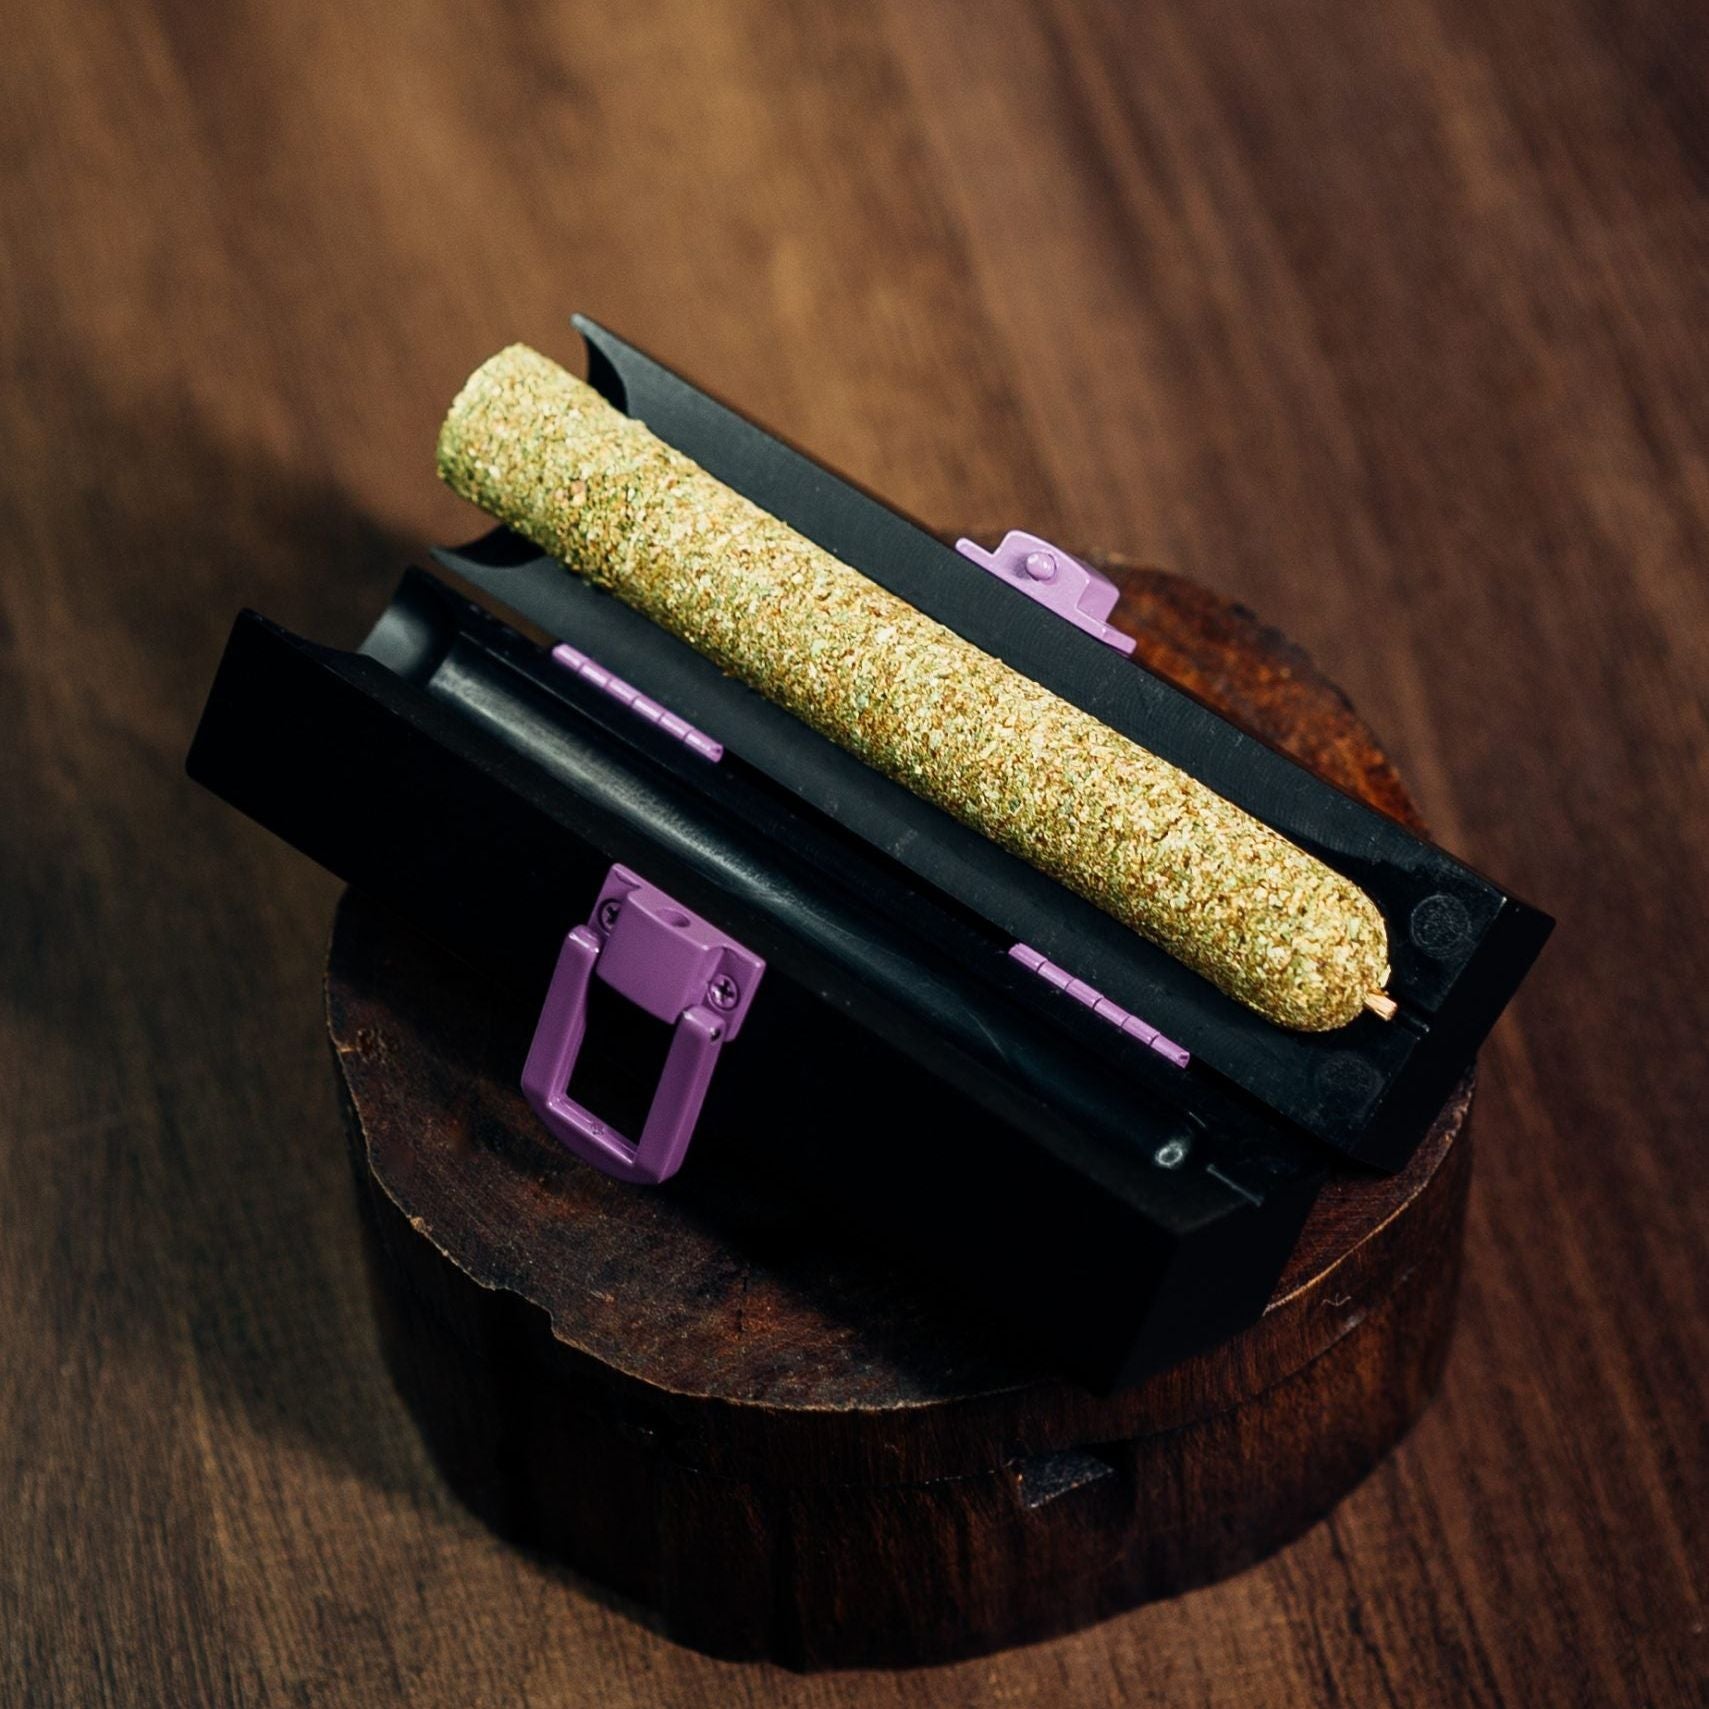 LARGE CannaMold with cannagar from Purple Rose Supply displayed on a wooden pedestal. The cannagar mold is displayed with a freshly pressed cannabis cigar - large enough for a group of people to smoke.